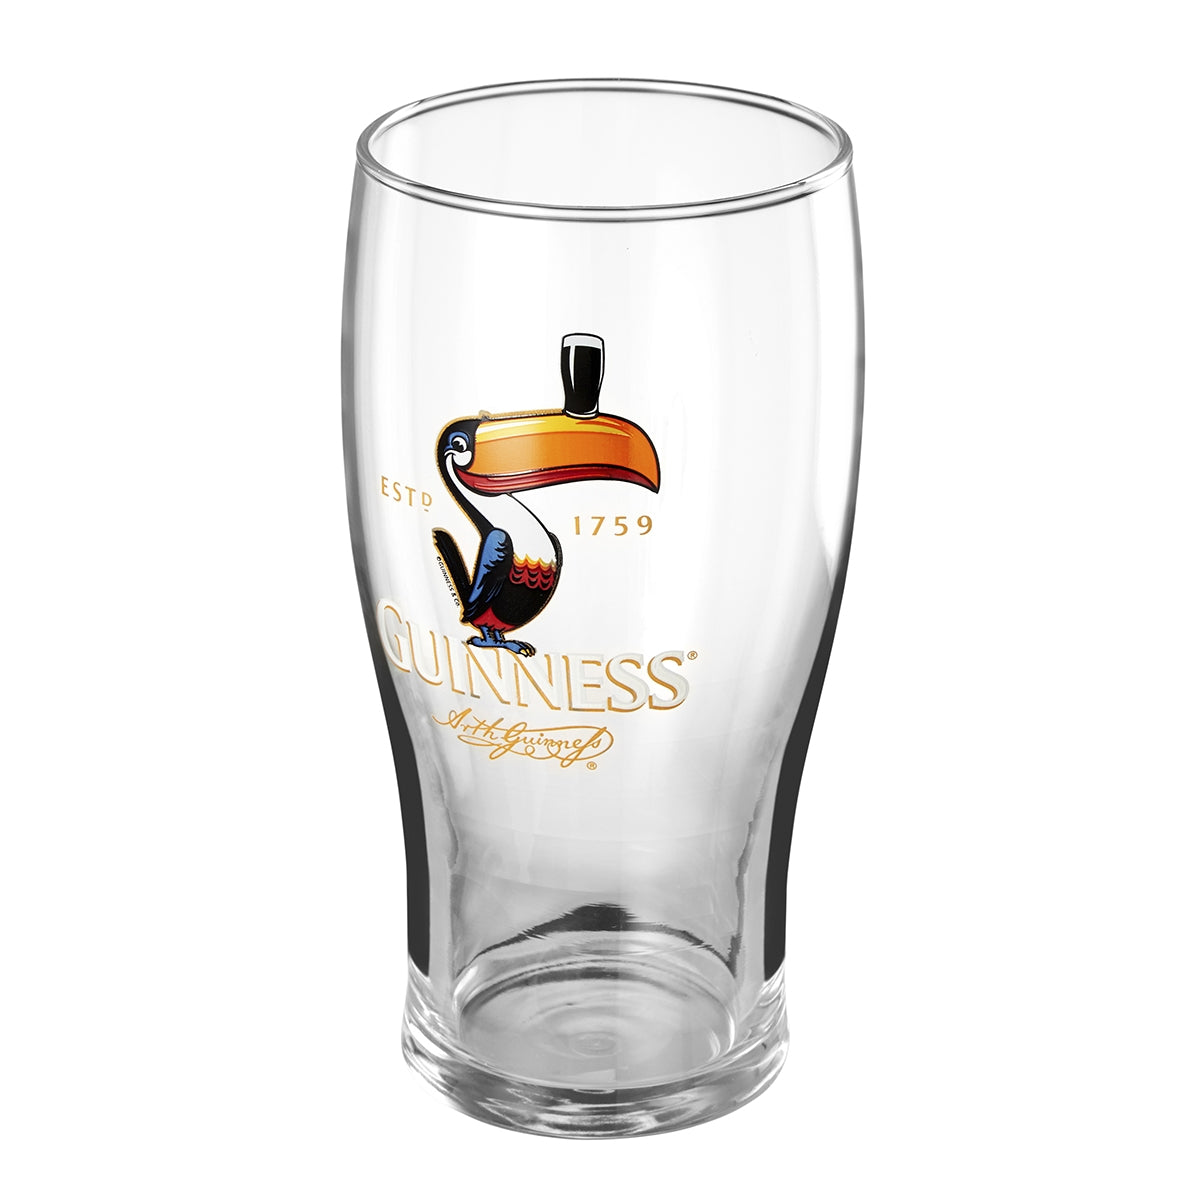 A Guinness UK branded Toucan Pint Glass, perfect for Guinness lovers.